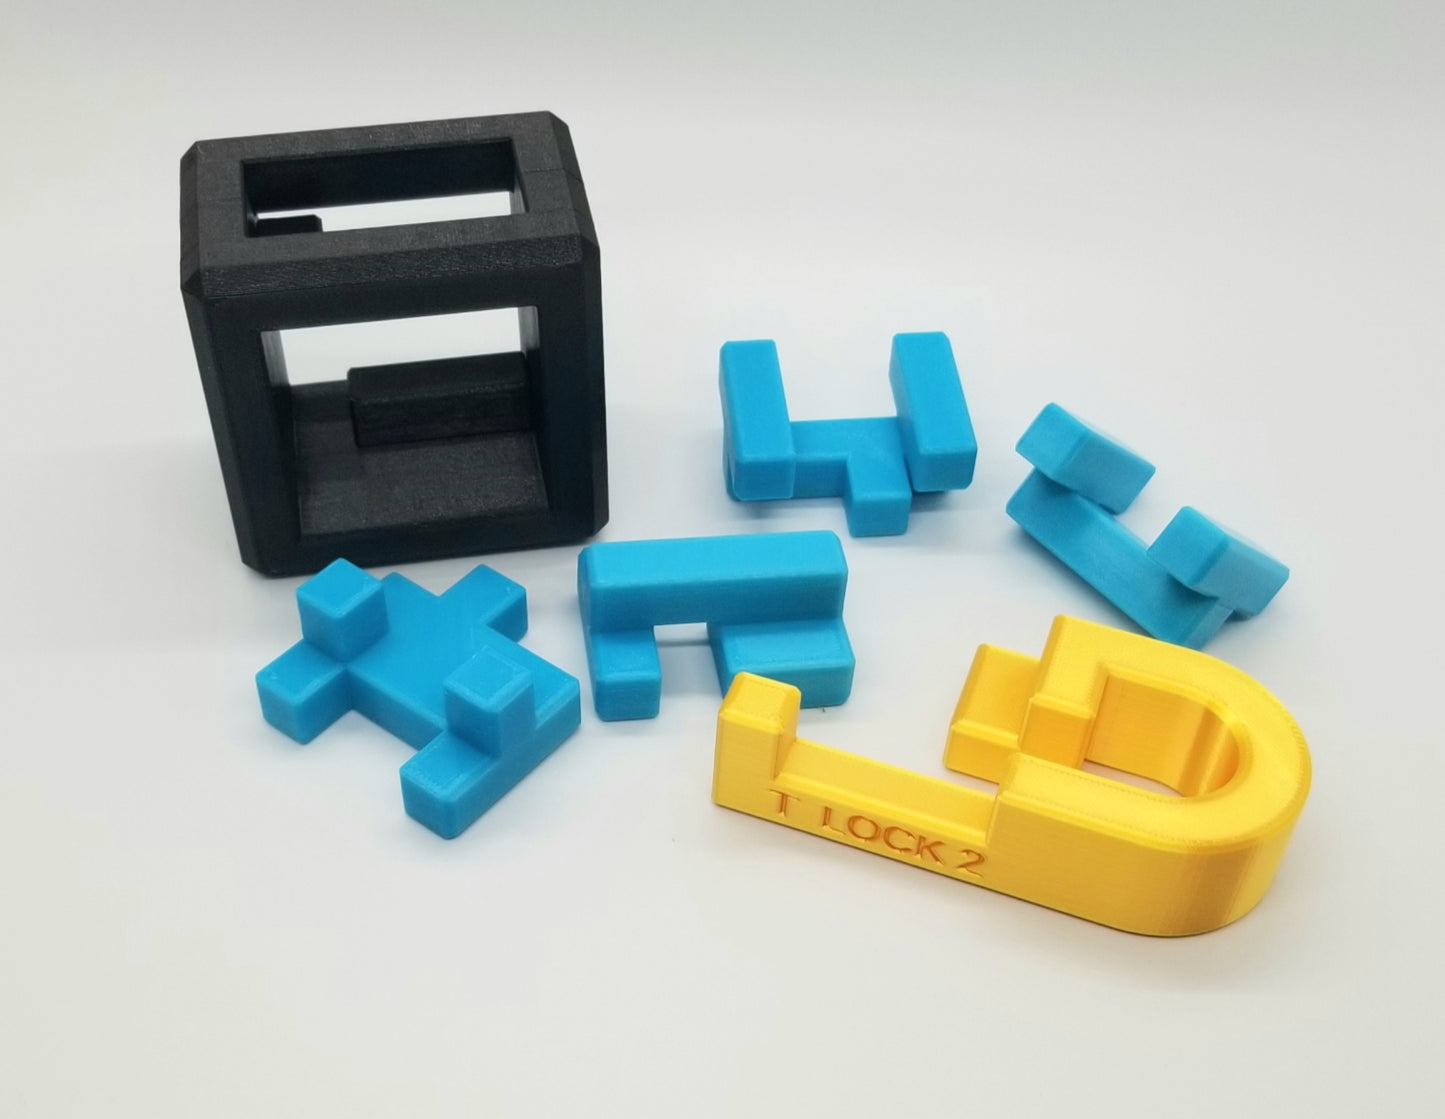 T Lock 2 - 3D Printed Puzzle Lock with Rotations